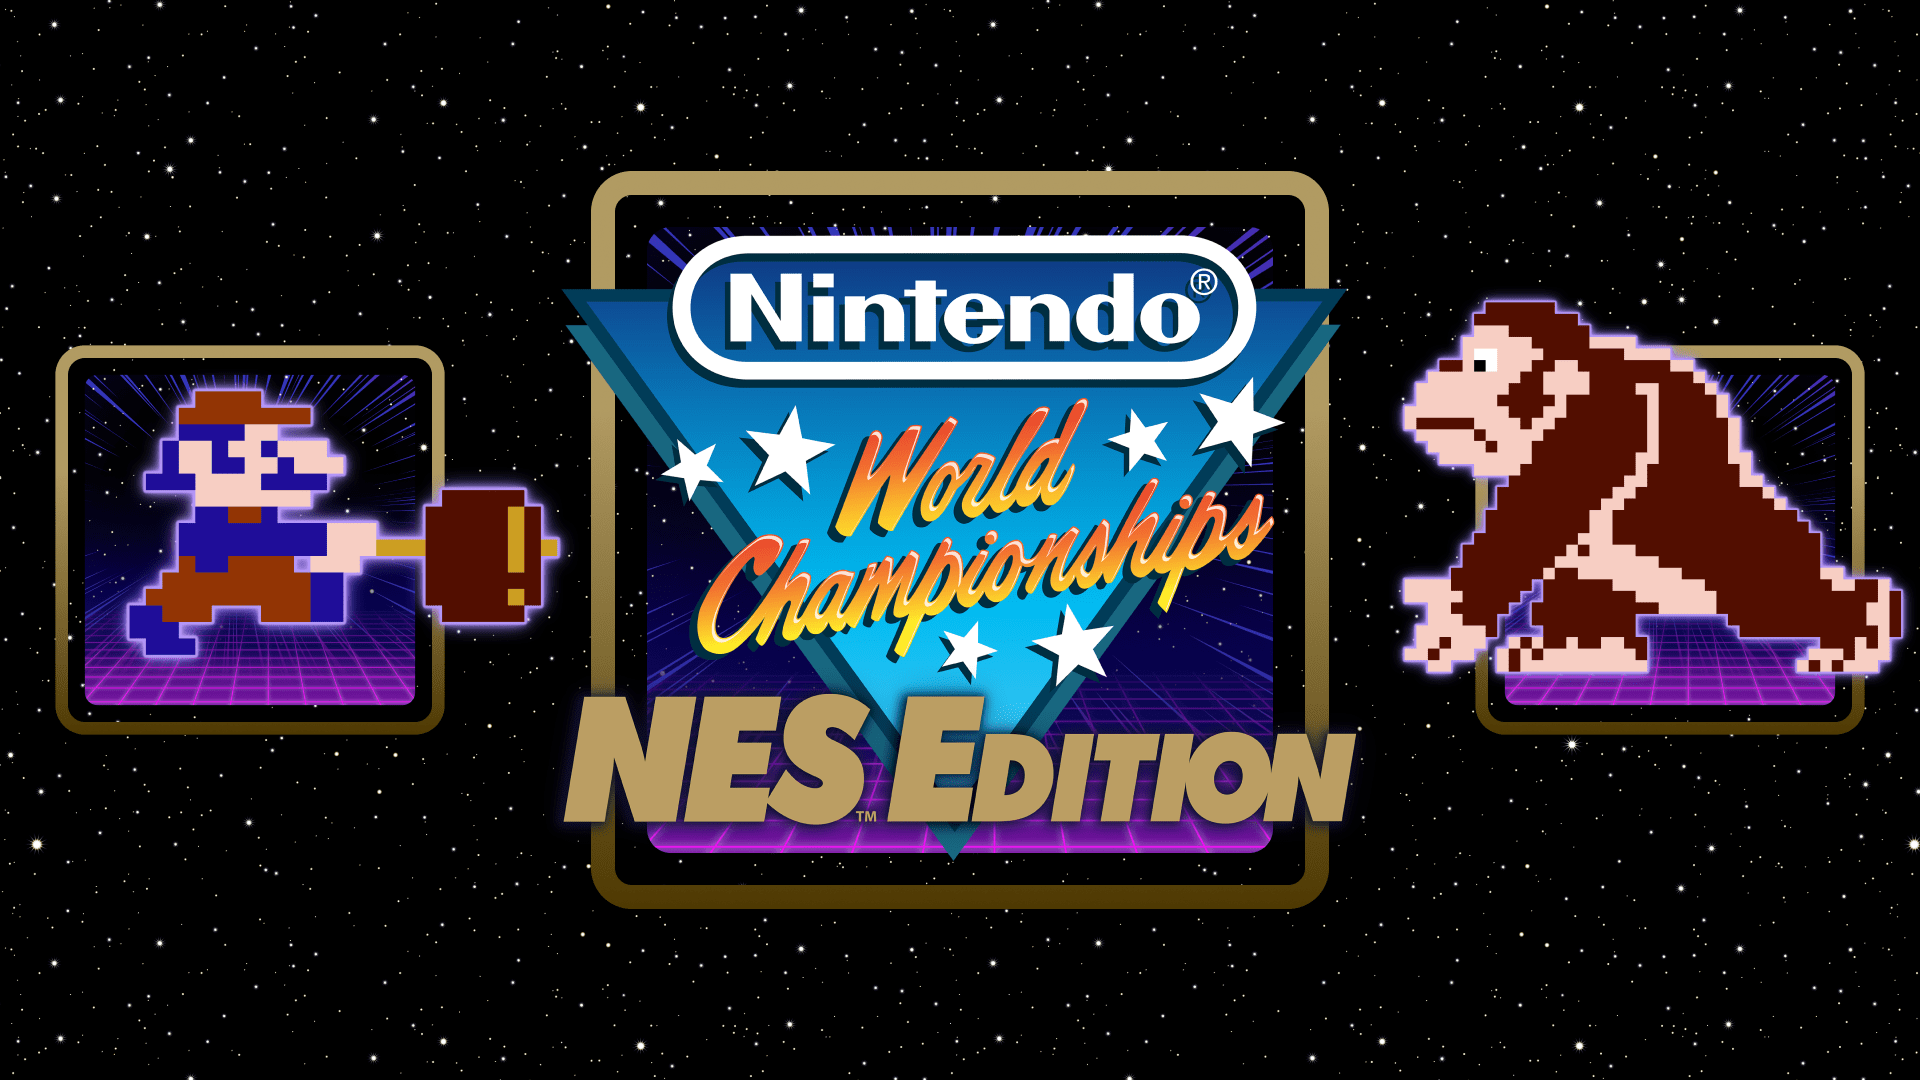 Nintendo World Championships: NES Edition with retro Mario and DK game art